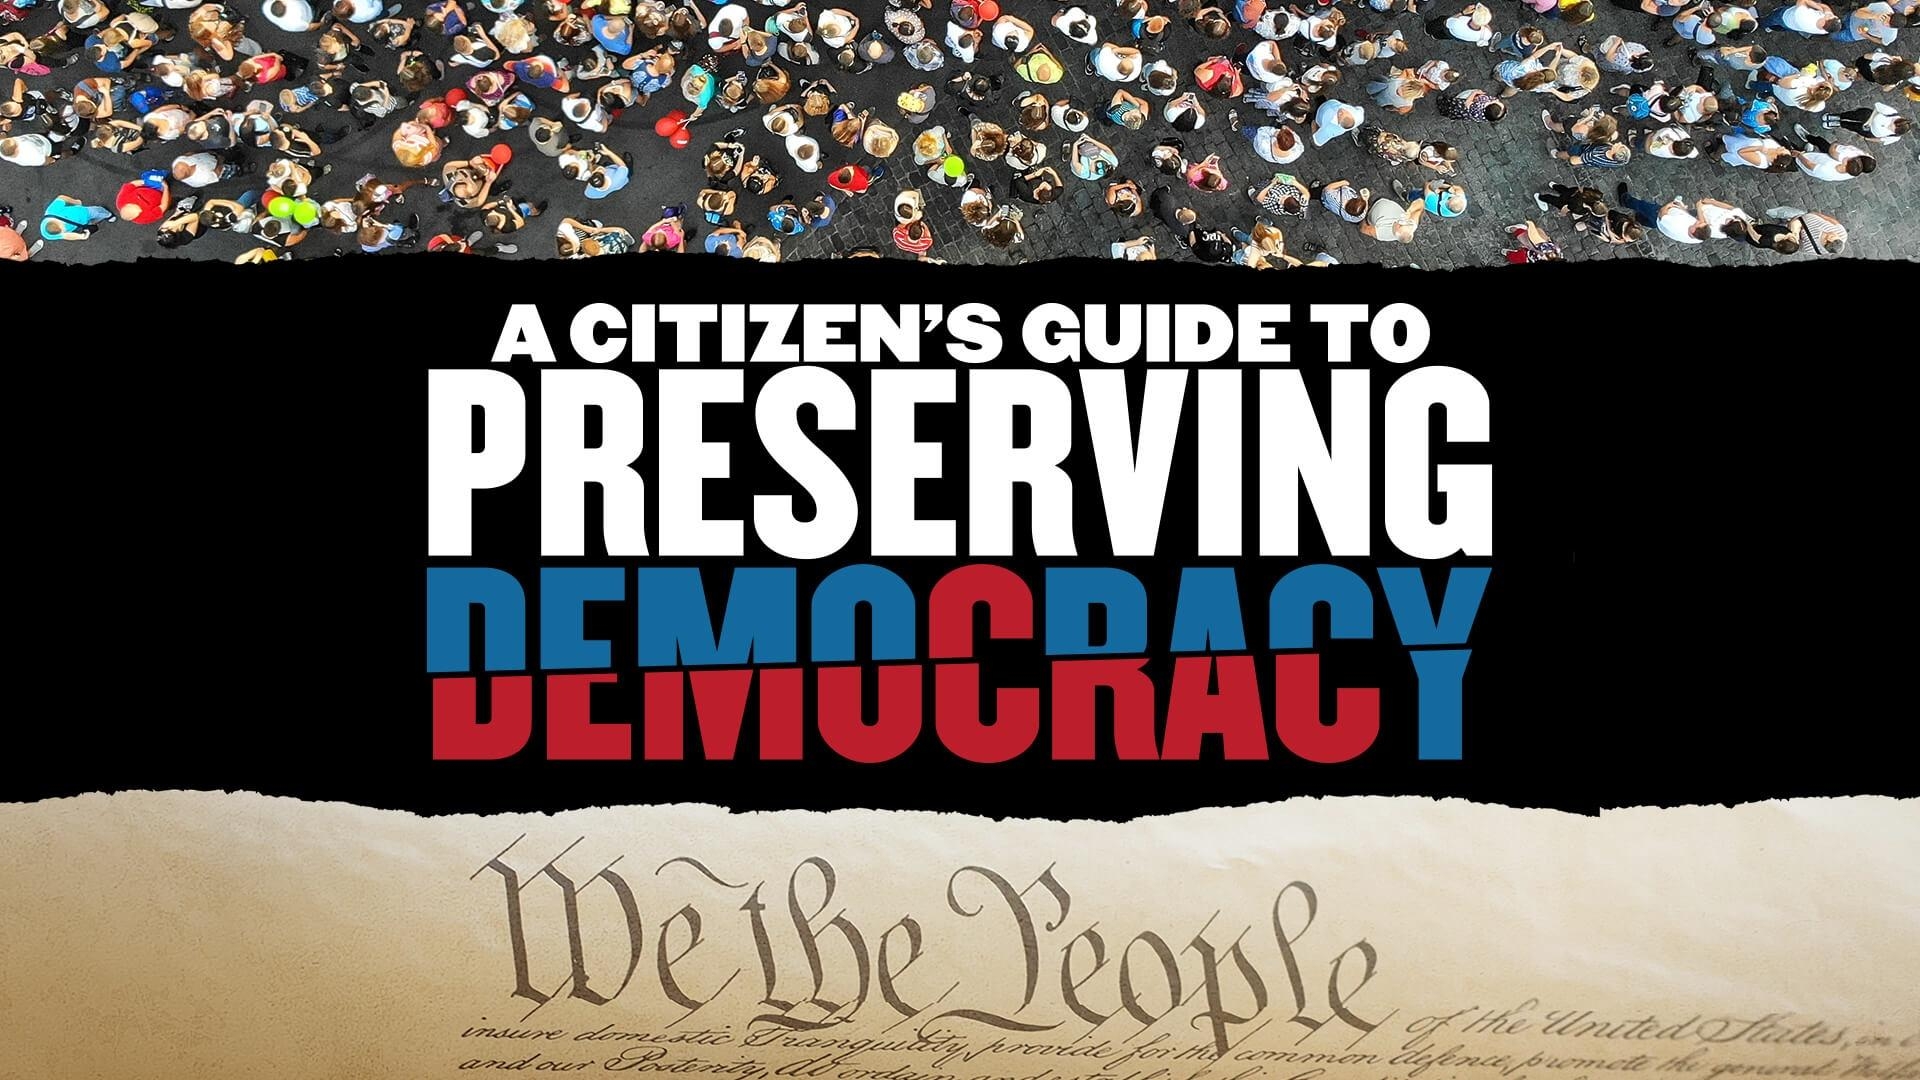 A Citizen's Guide to Preserving Democracy